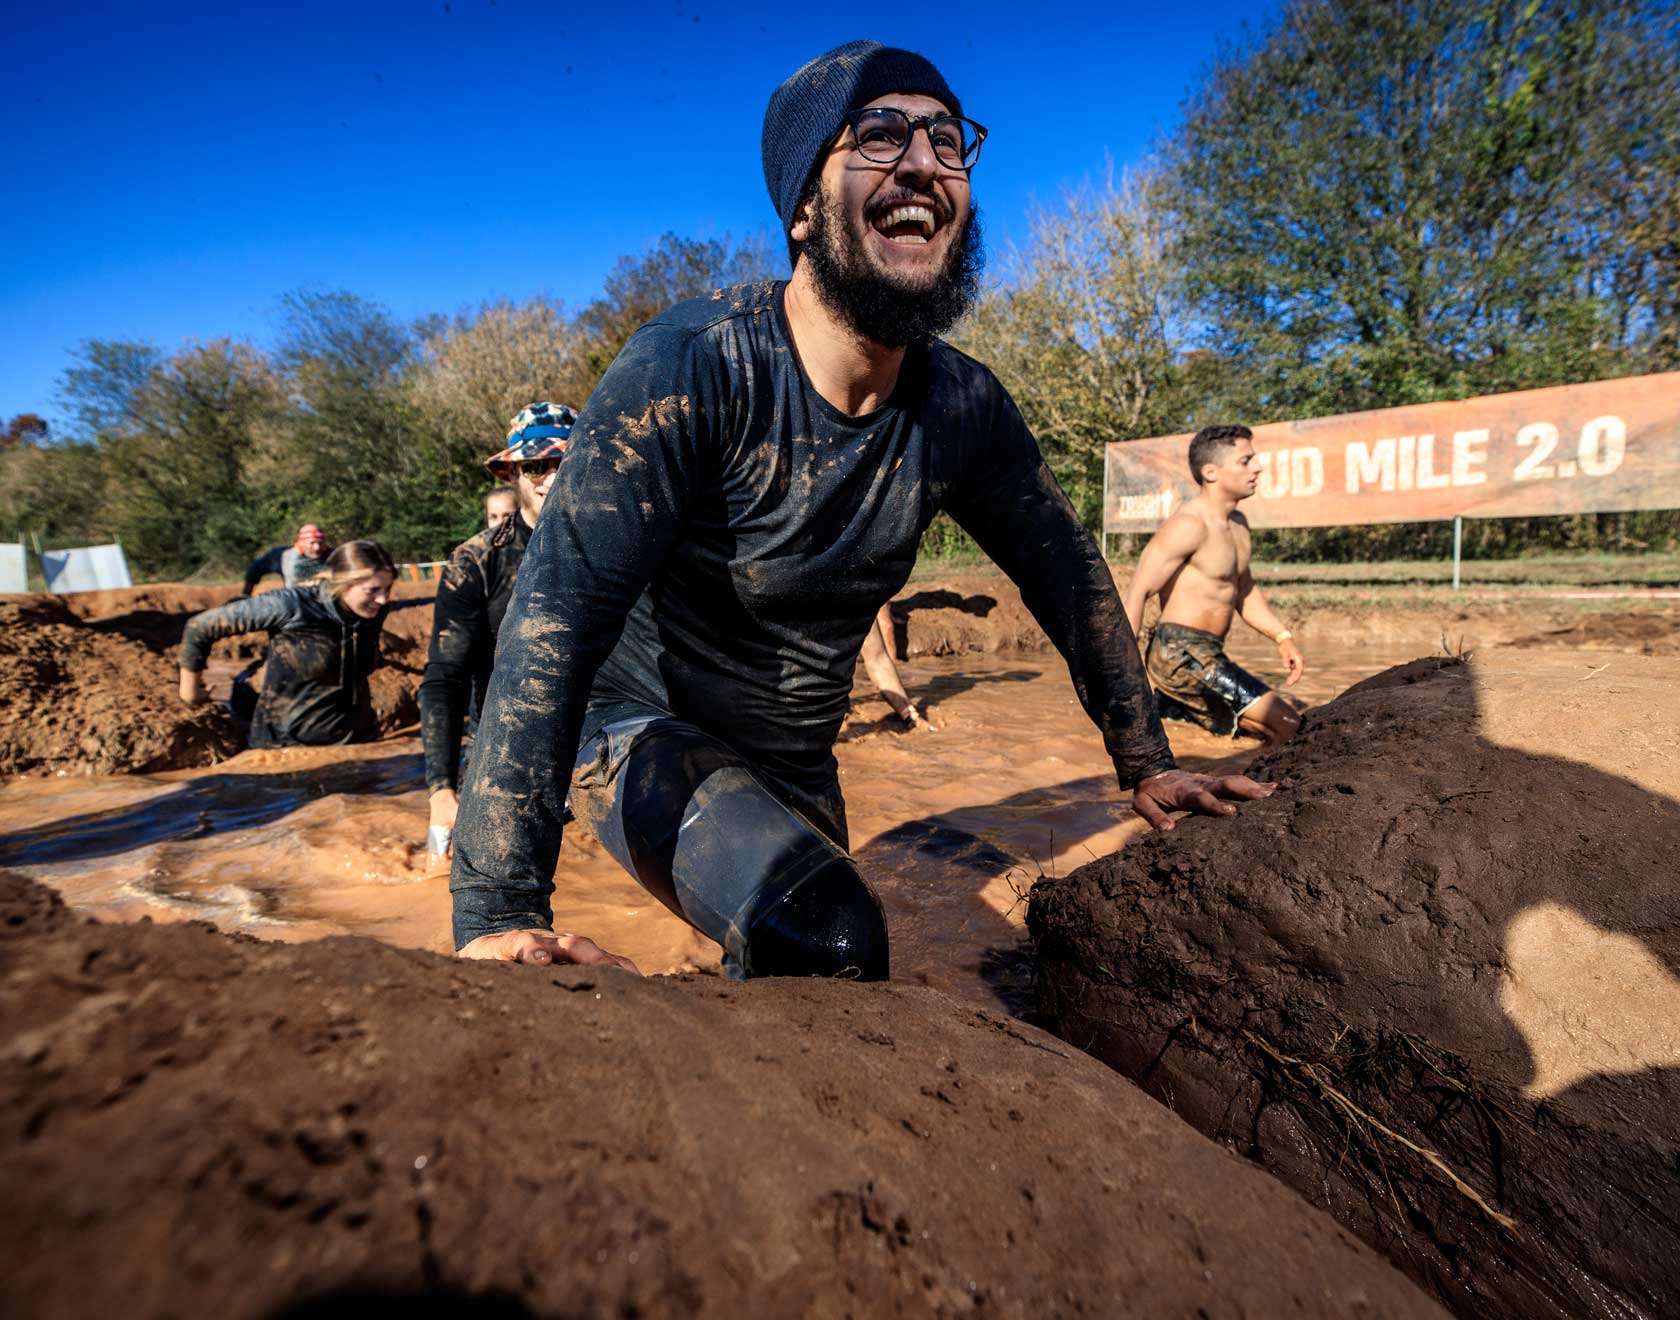 Participant smiling widely as he comes out of the mud